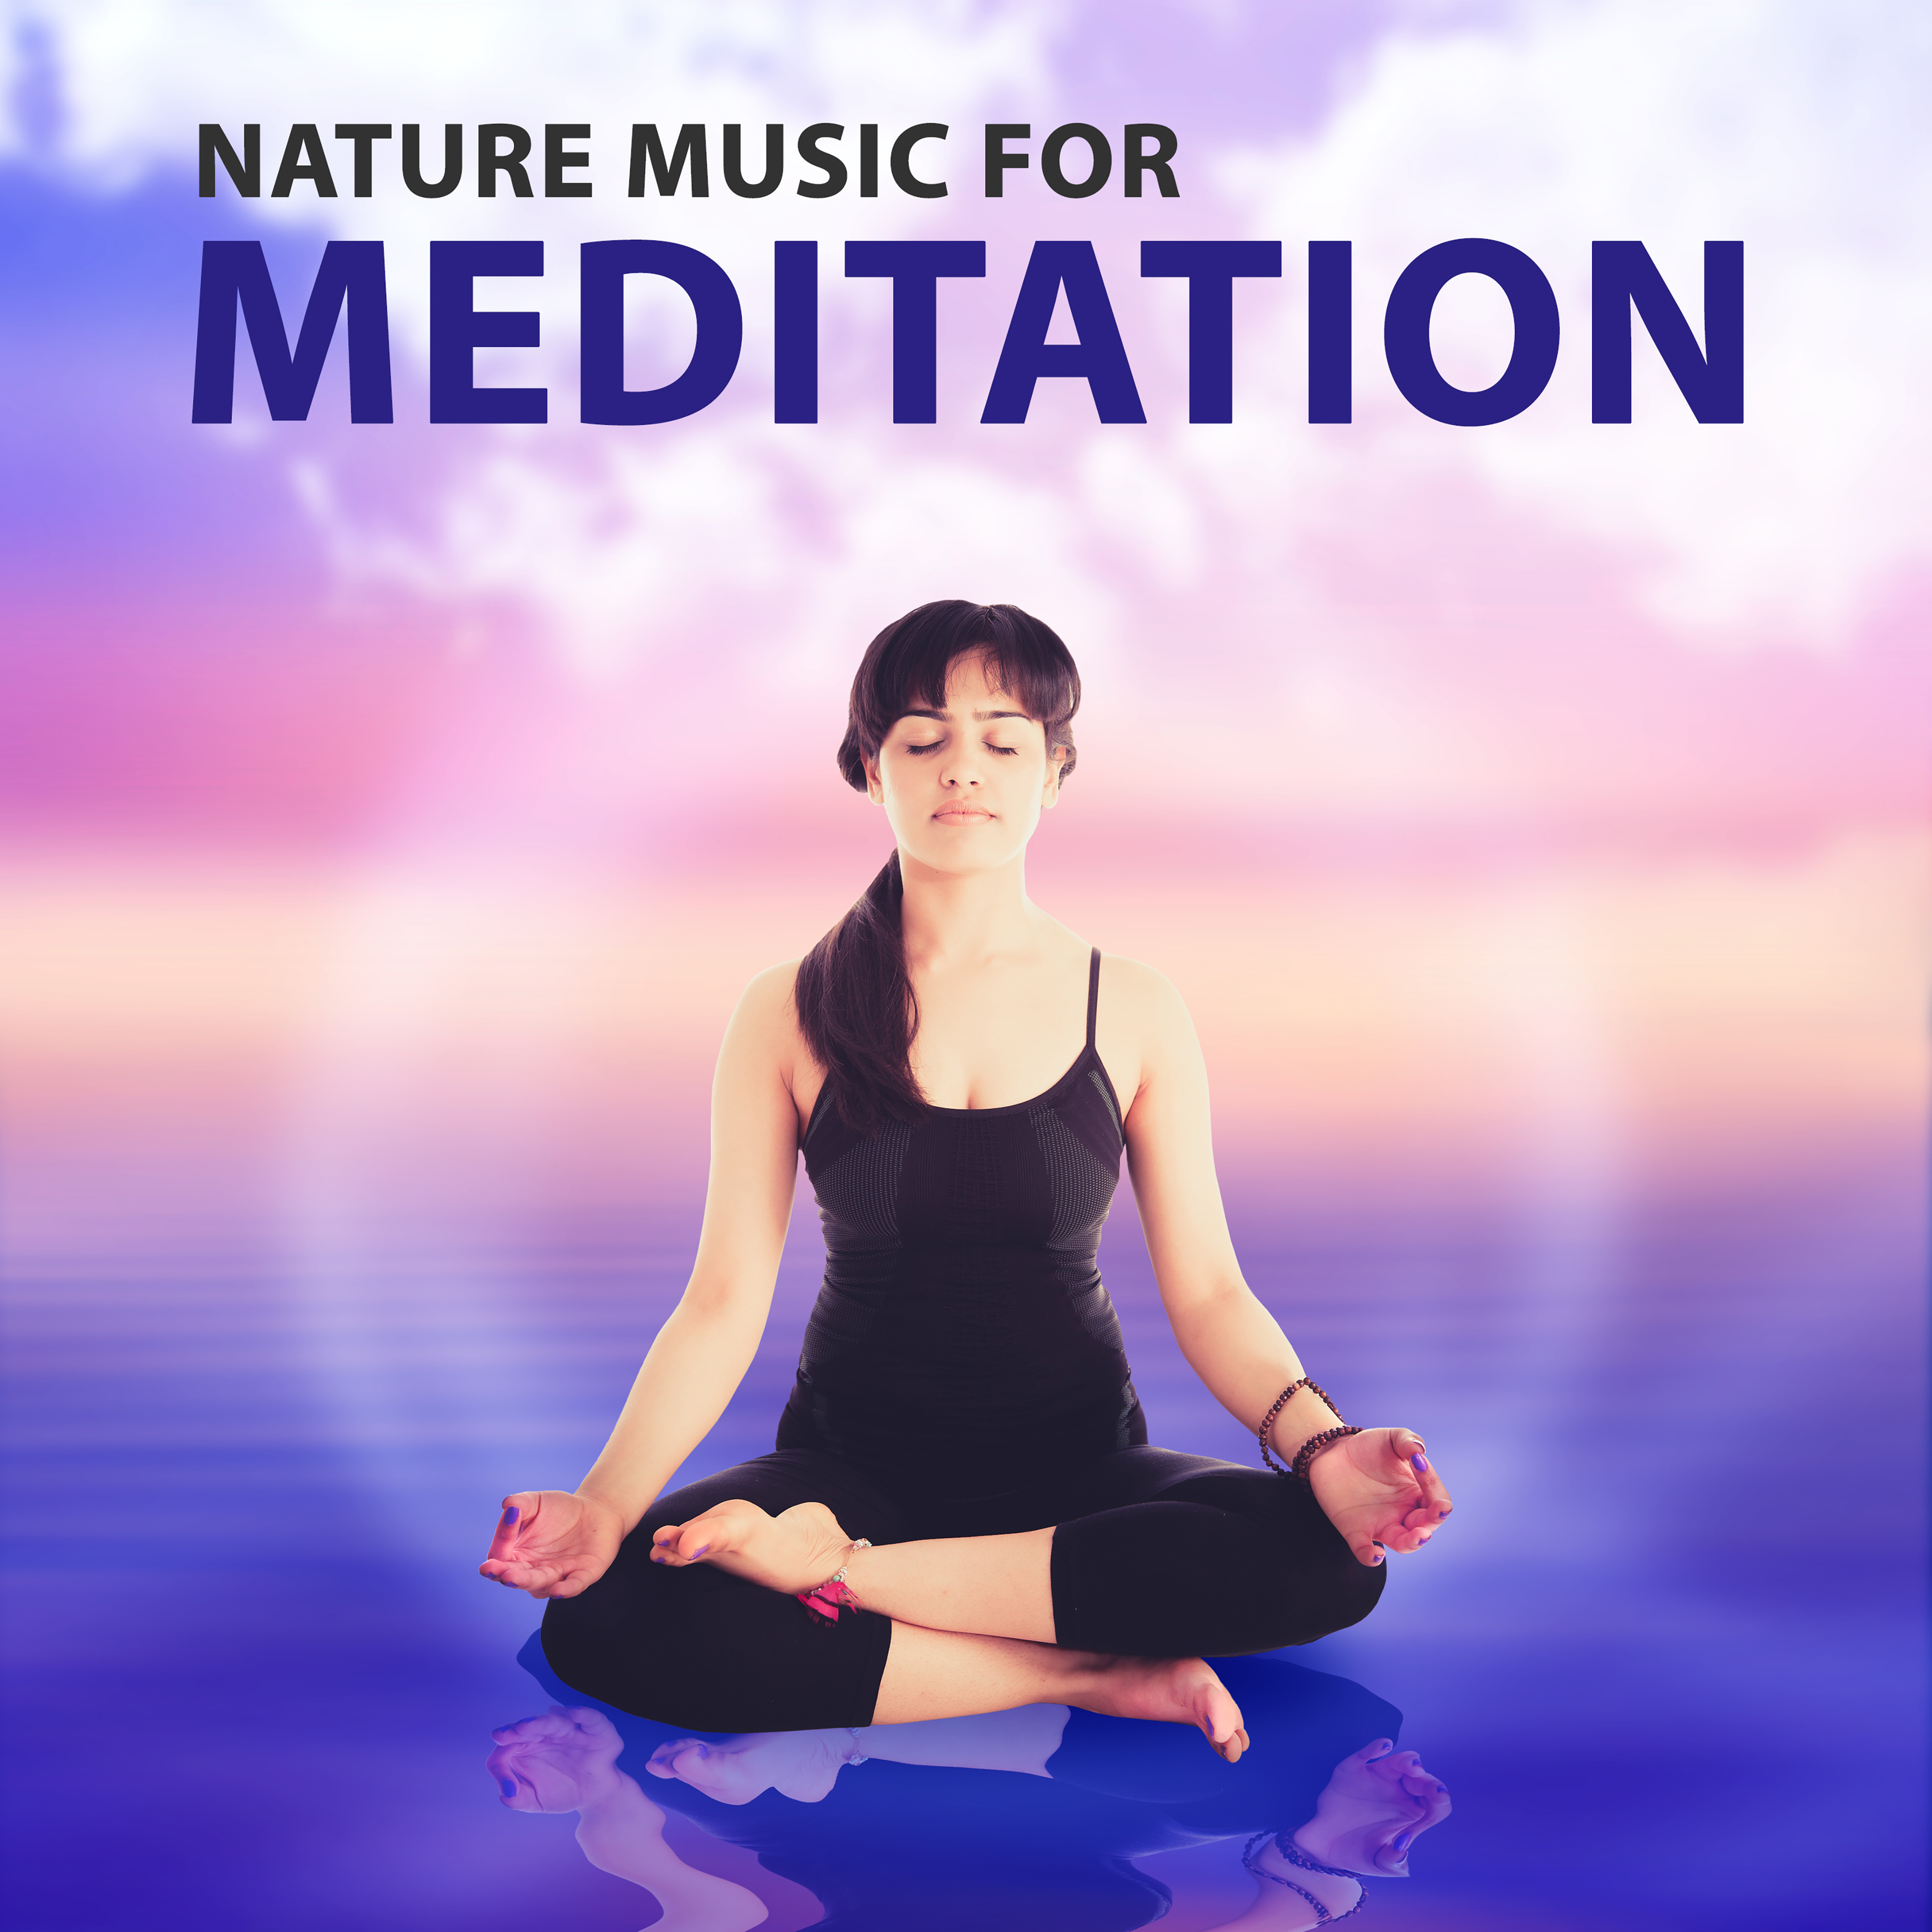 Nature Music for Meditation – Calming Music for Rest, Help to Mindfulness Practice